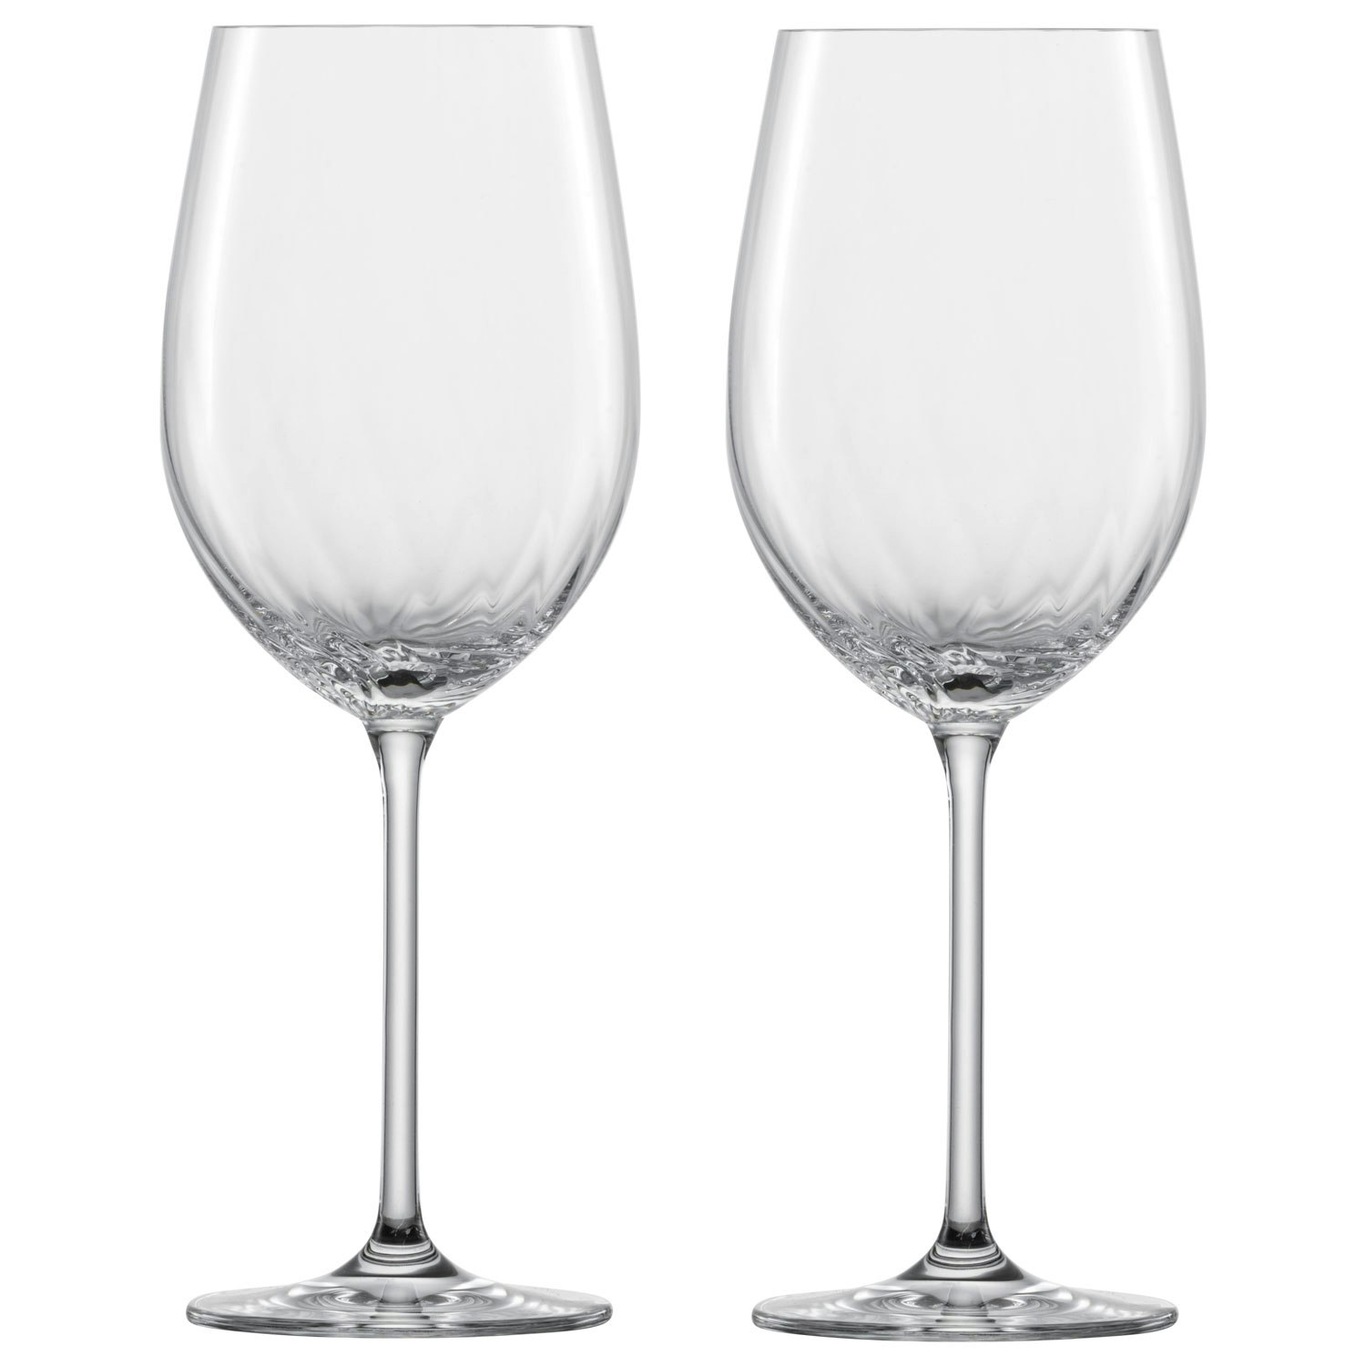 https://royaldesign.com/image/2/zwiesel-prizma-bordeaux-red-wine-glass-56-cl-2-pack-0?w=800&quality=80